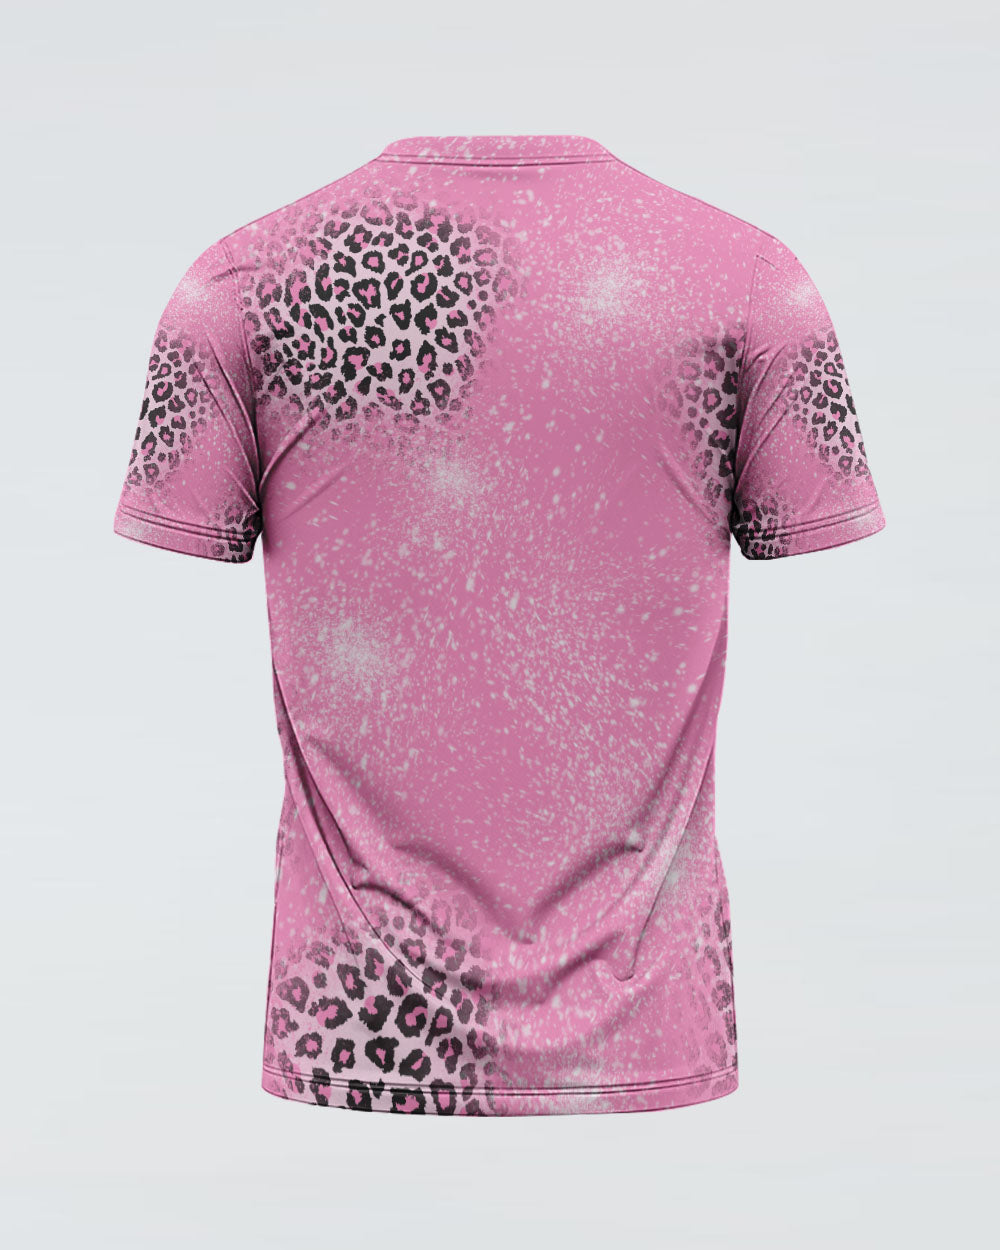 Pink Leopard Tackle Cancer Women's Breast Cancer Awareness Tshirt